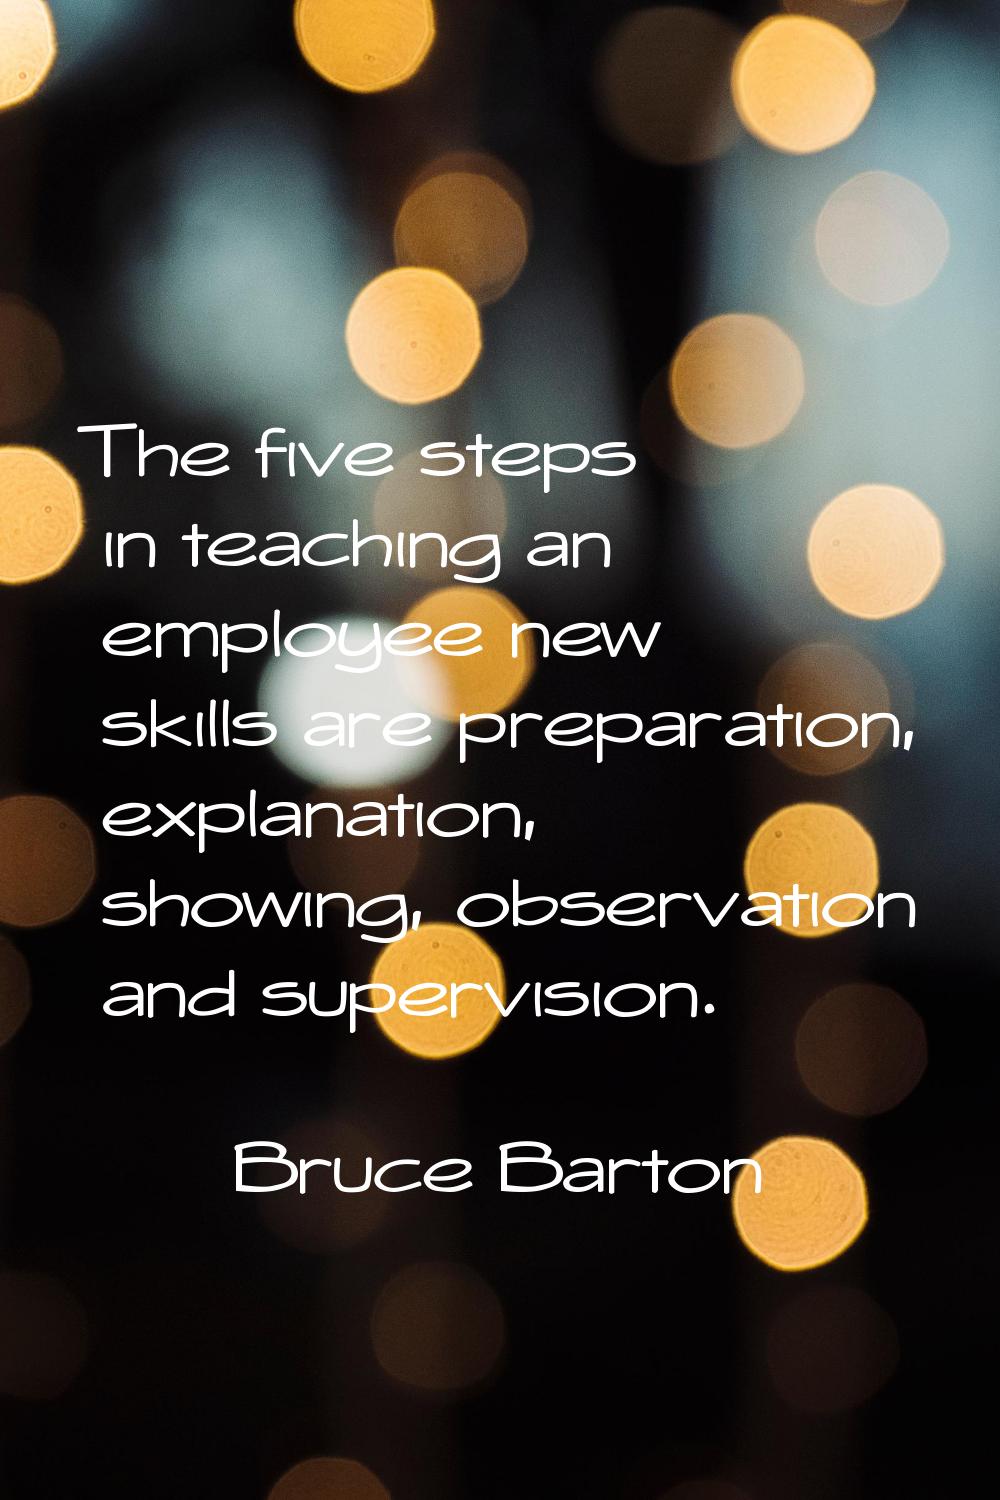 The five steps in teaching an employee new skills are preparation, explanation, showing, observatio